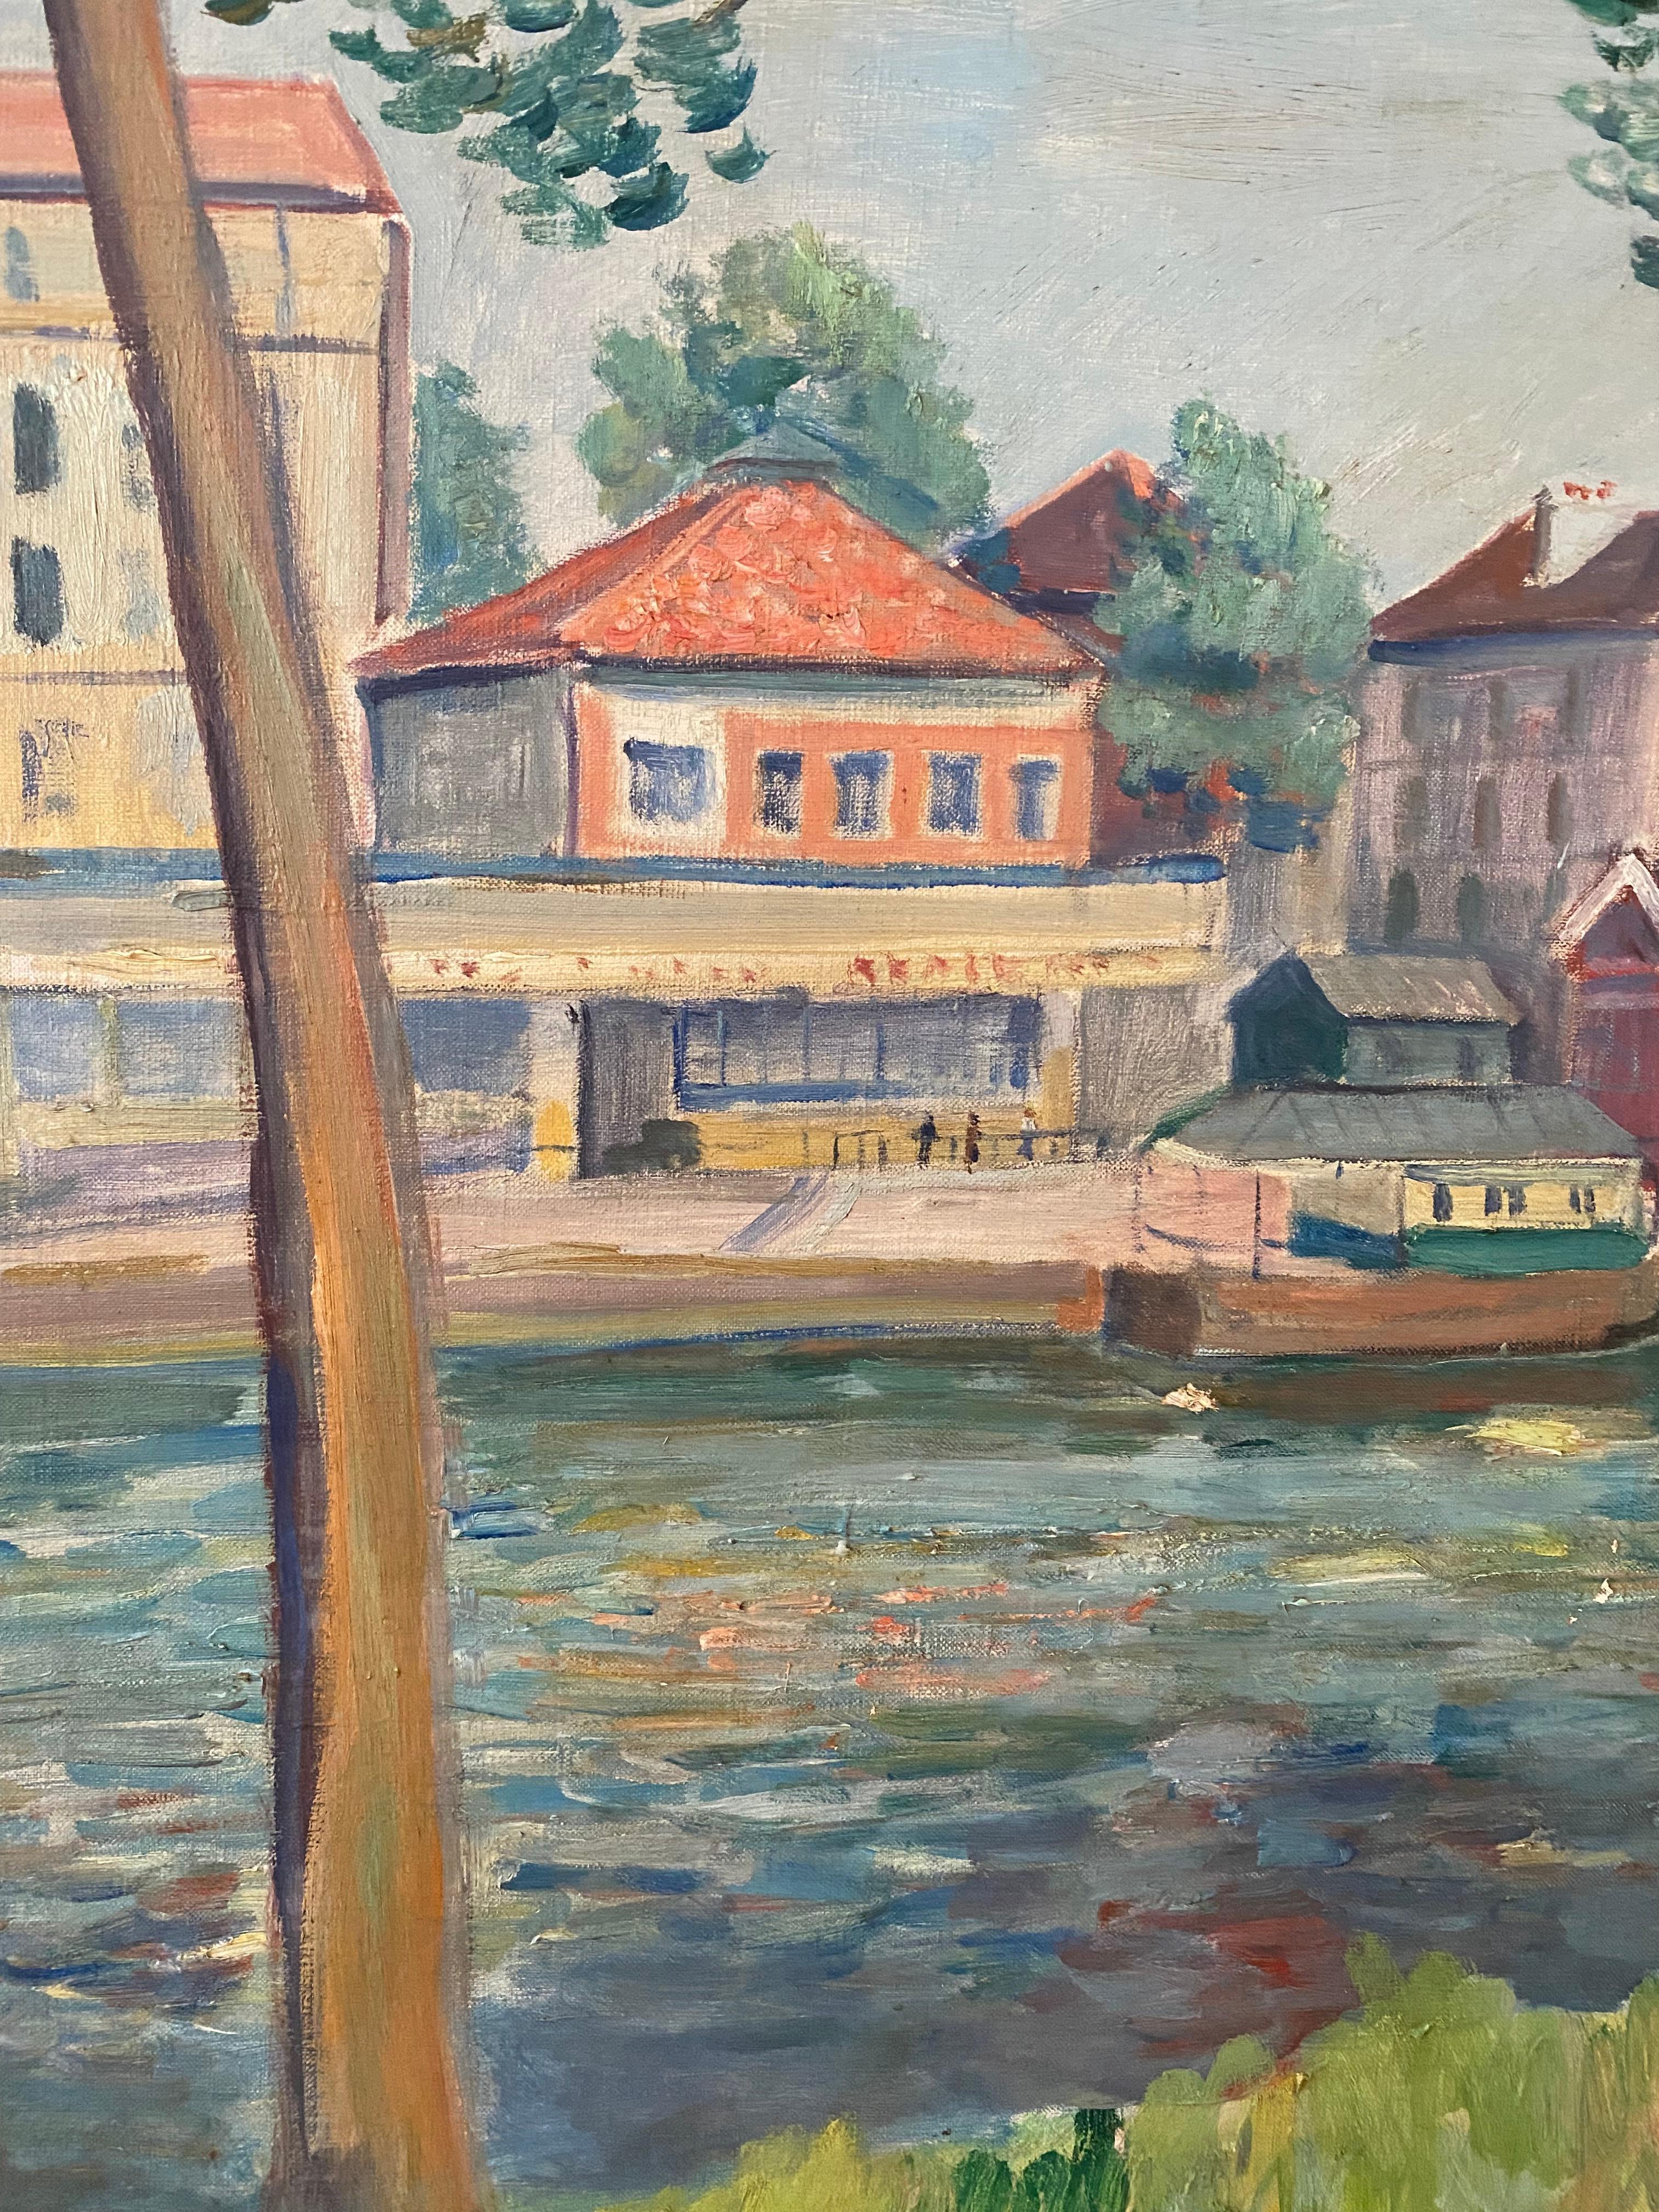 The Seine at Saint-Cloud - Painting by Constantin Terechkovitch